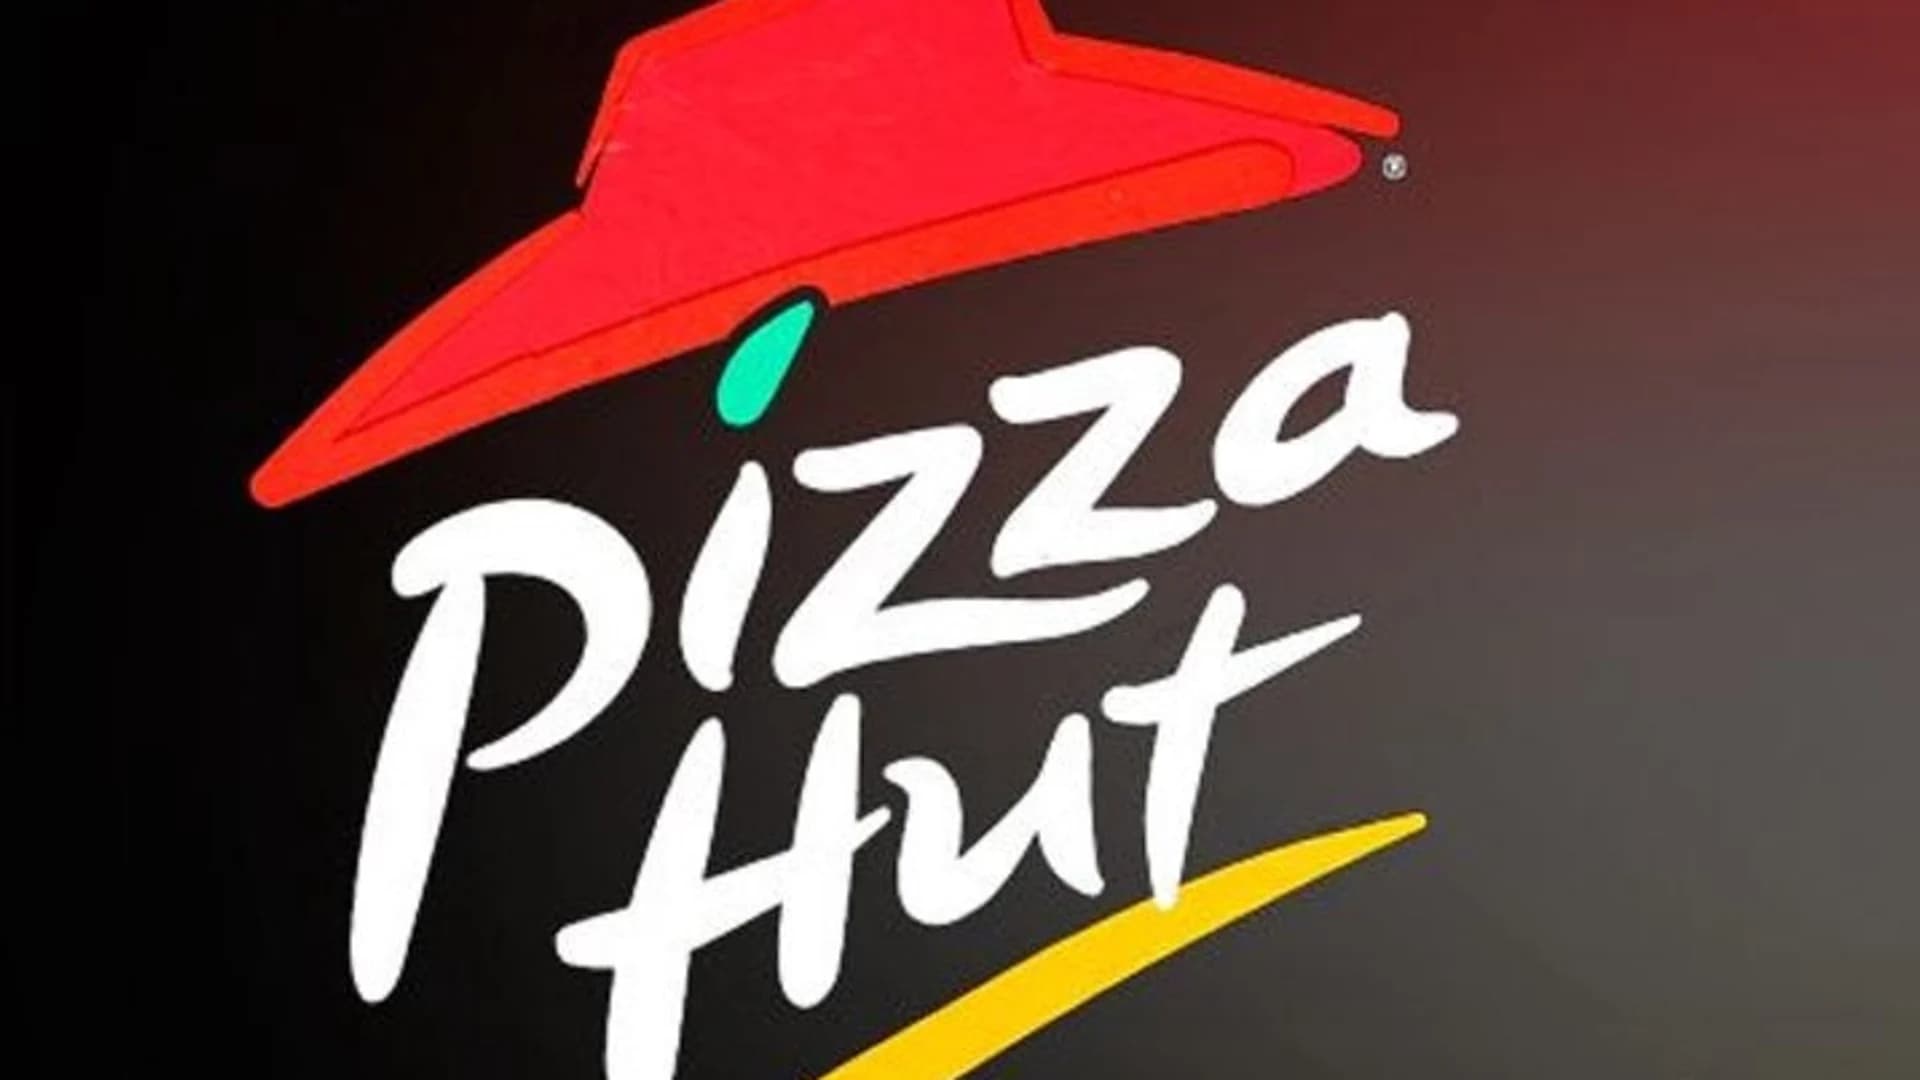 Police: Pizza Hut employee faked robbery ‘to look favorable with corporate’